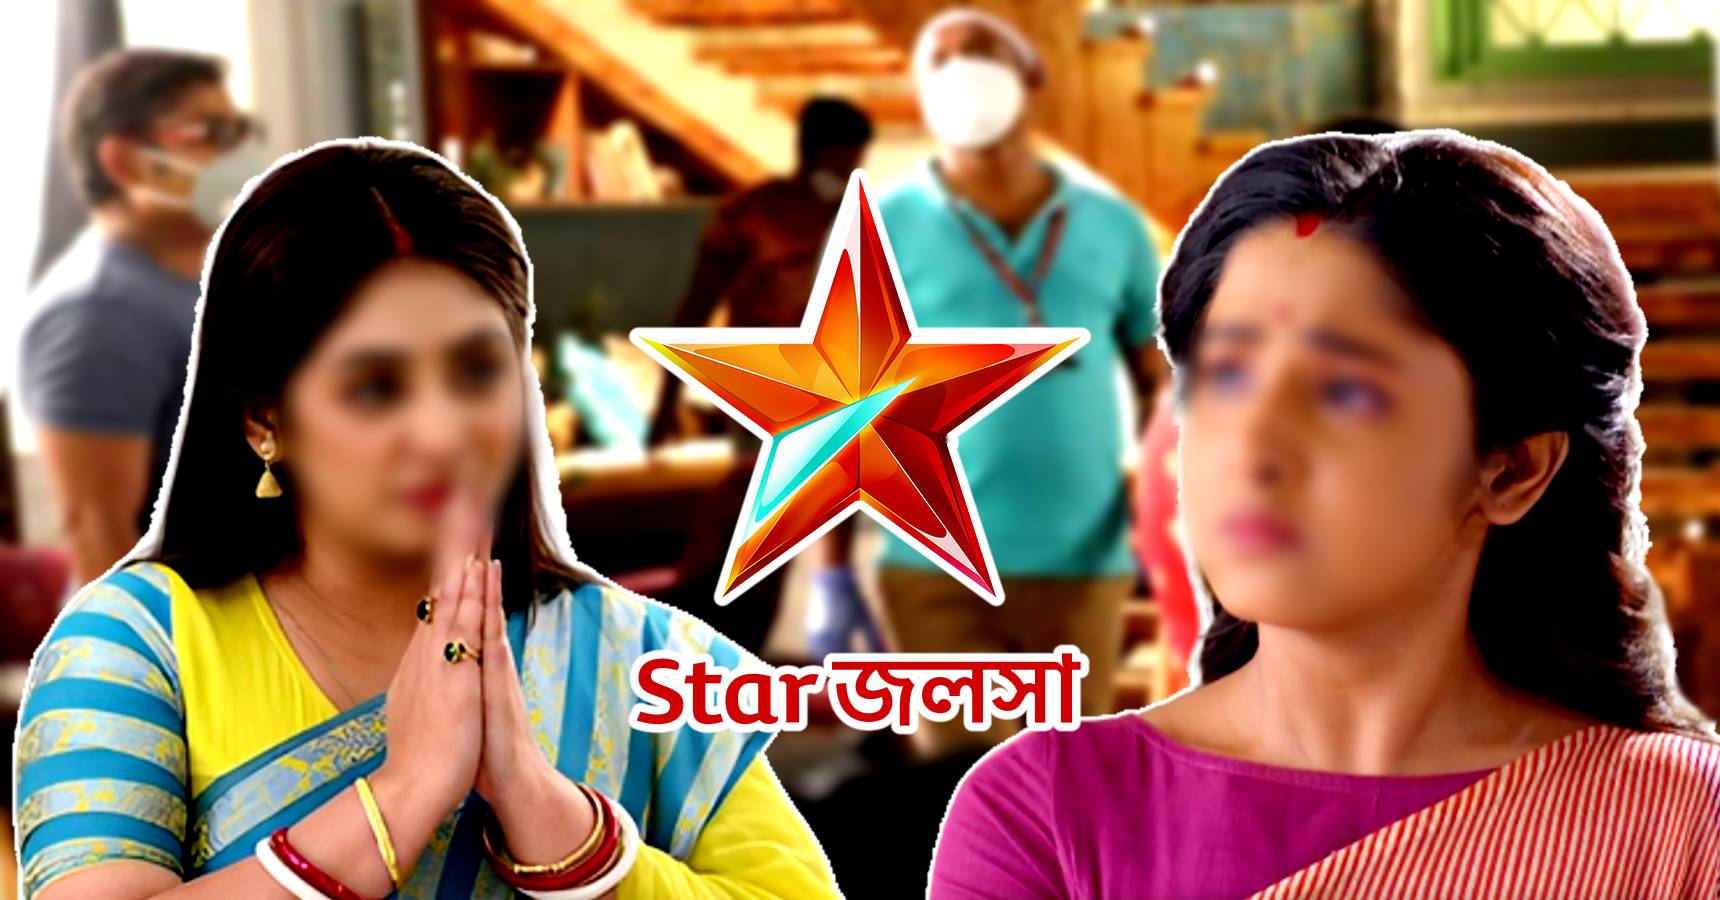 This Star Jalsha Bengali serial might end soon due to lack of TRP